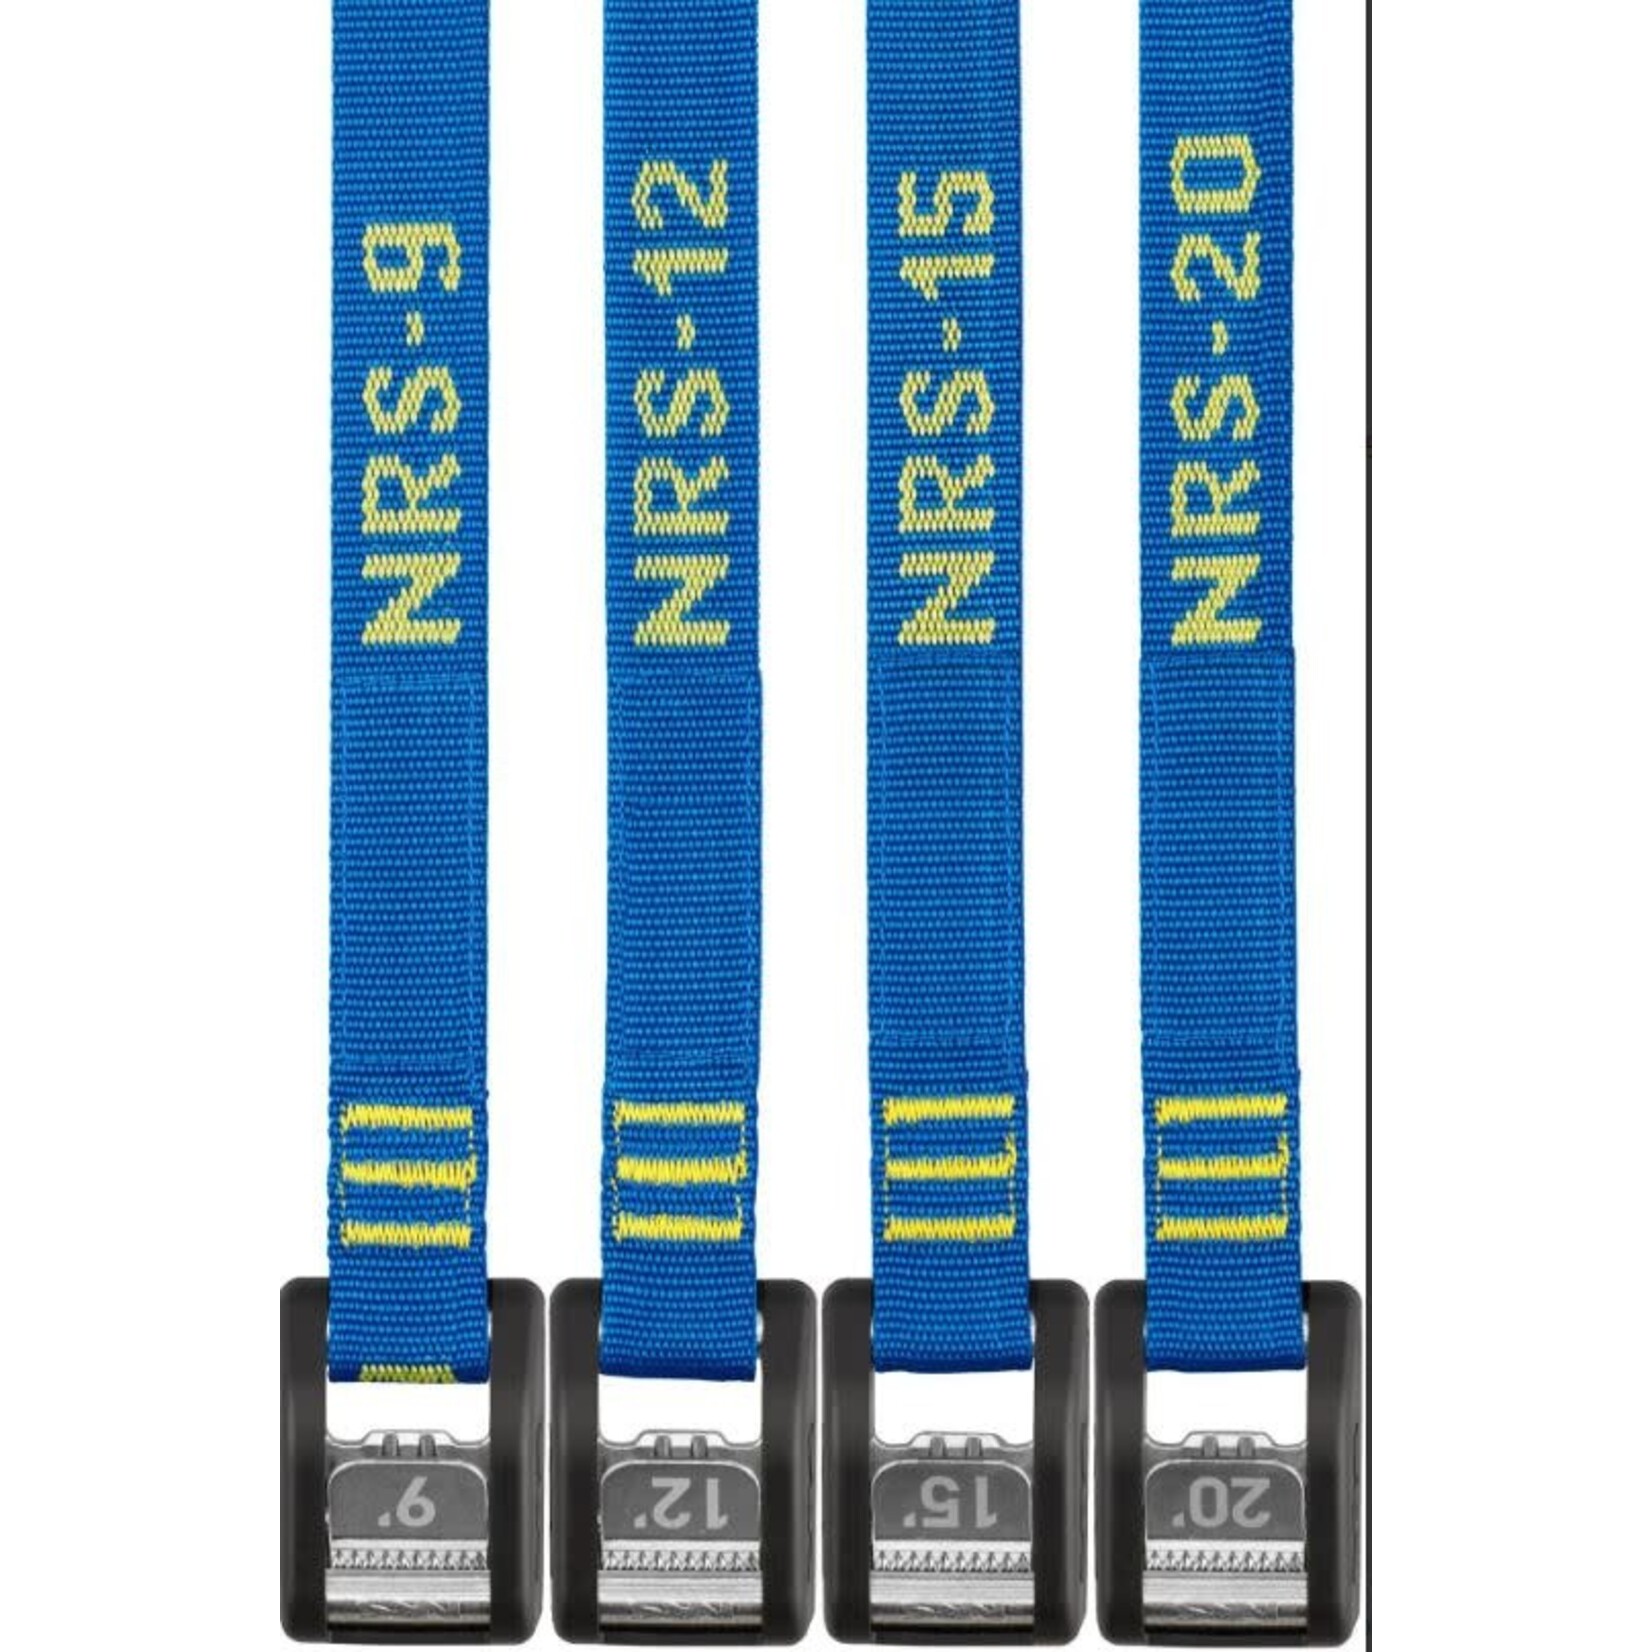 NRS NRS Buckle Bumper Straps - 12' Pair, Iconic Blue